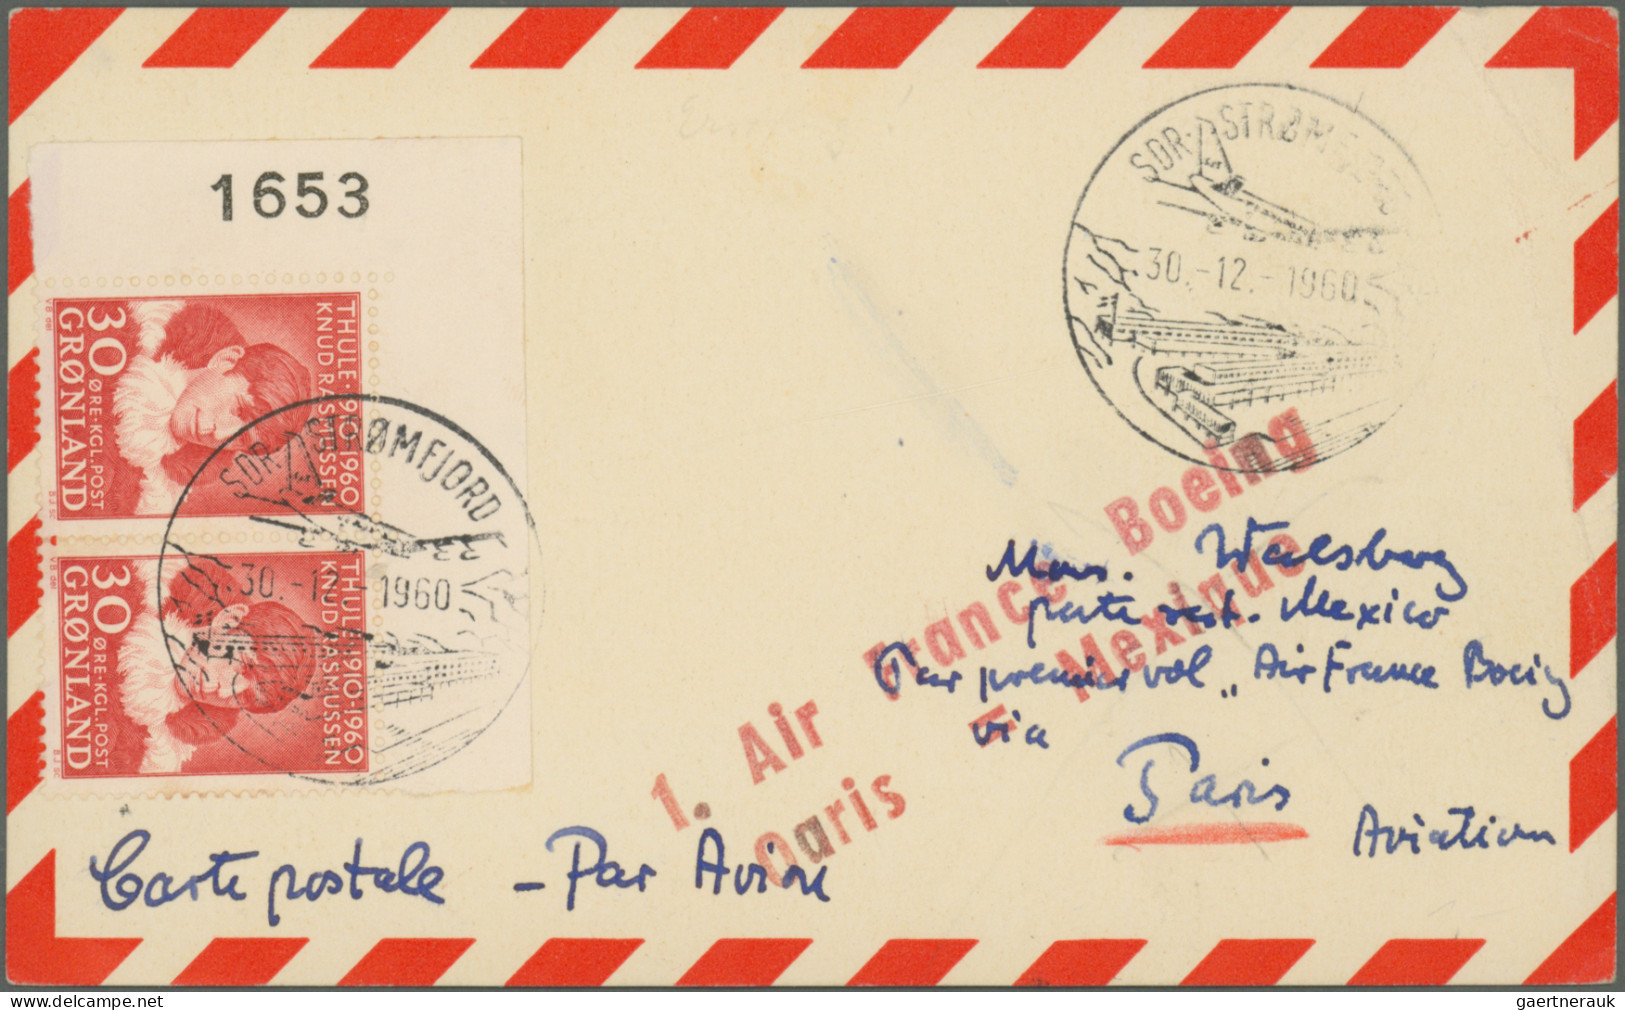 Denmark: 1860/1990 (ca.), balance of apprx. 195 covers/cards, mainly commercial